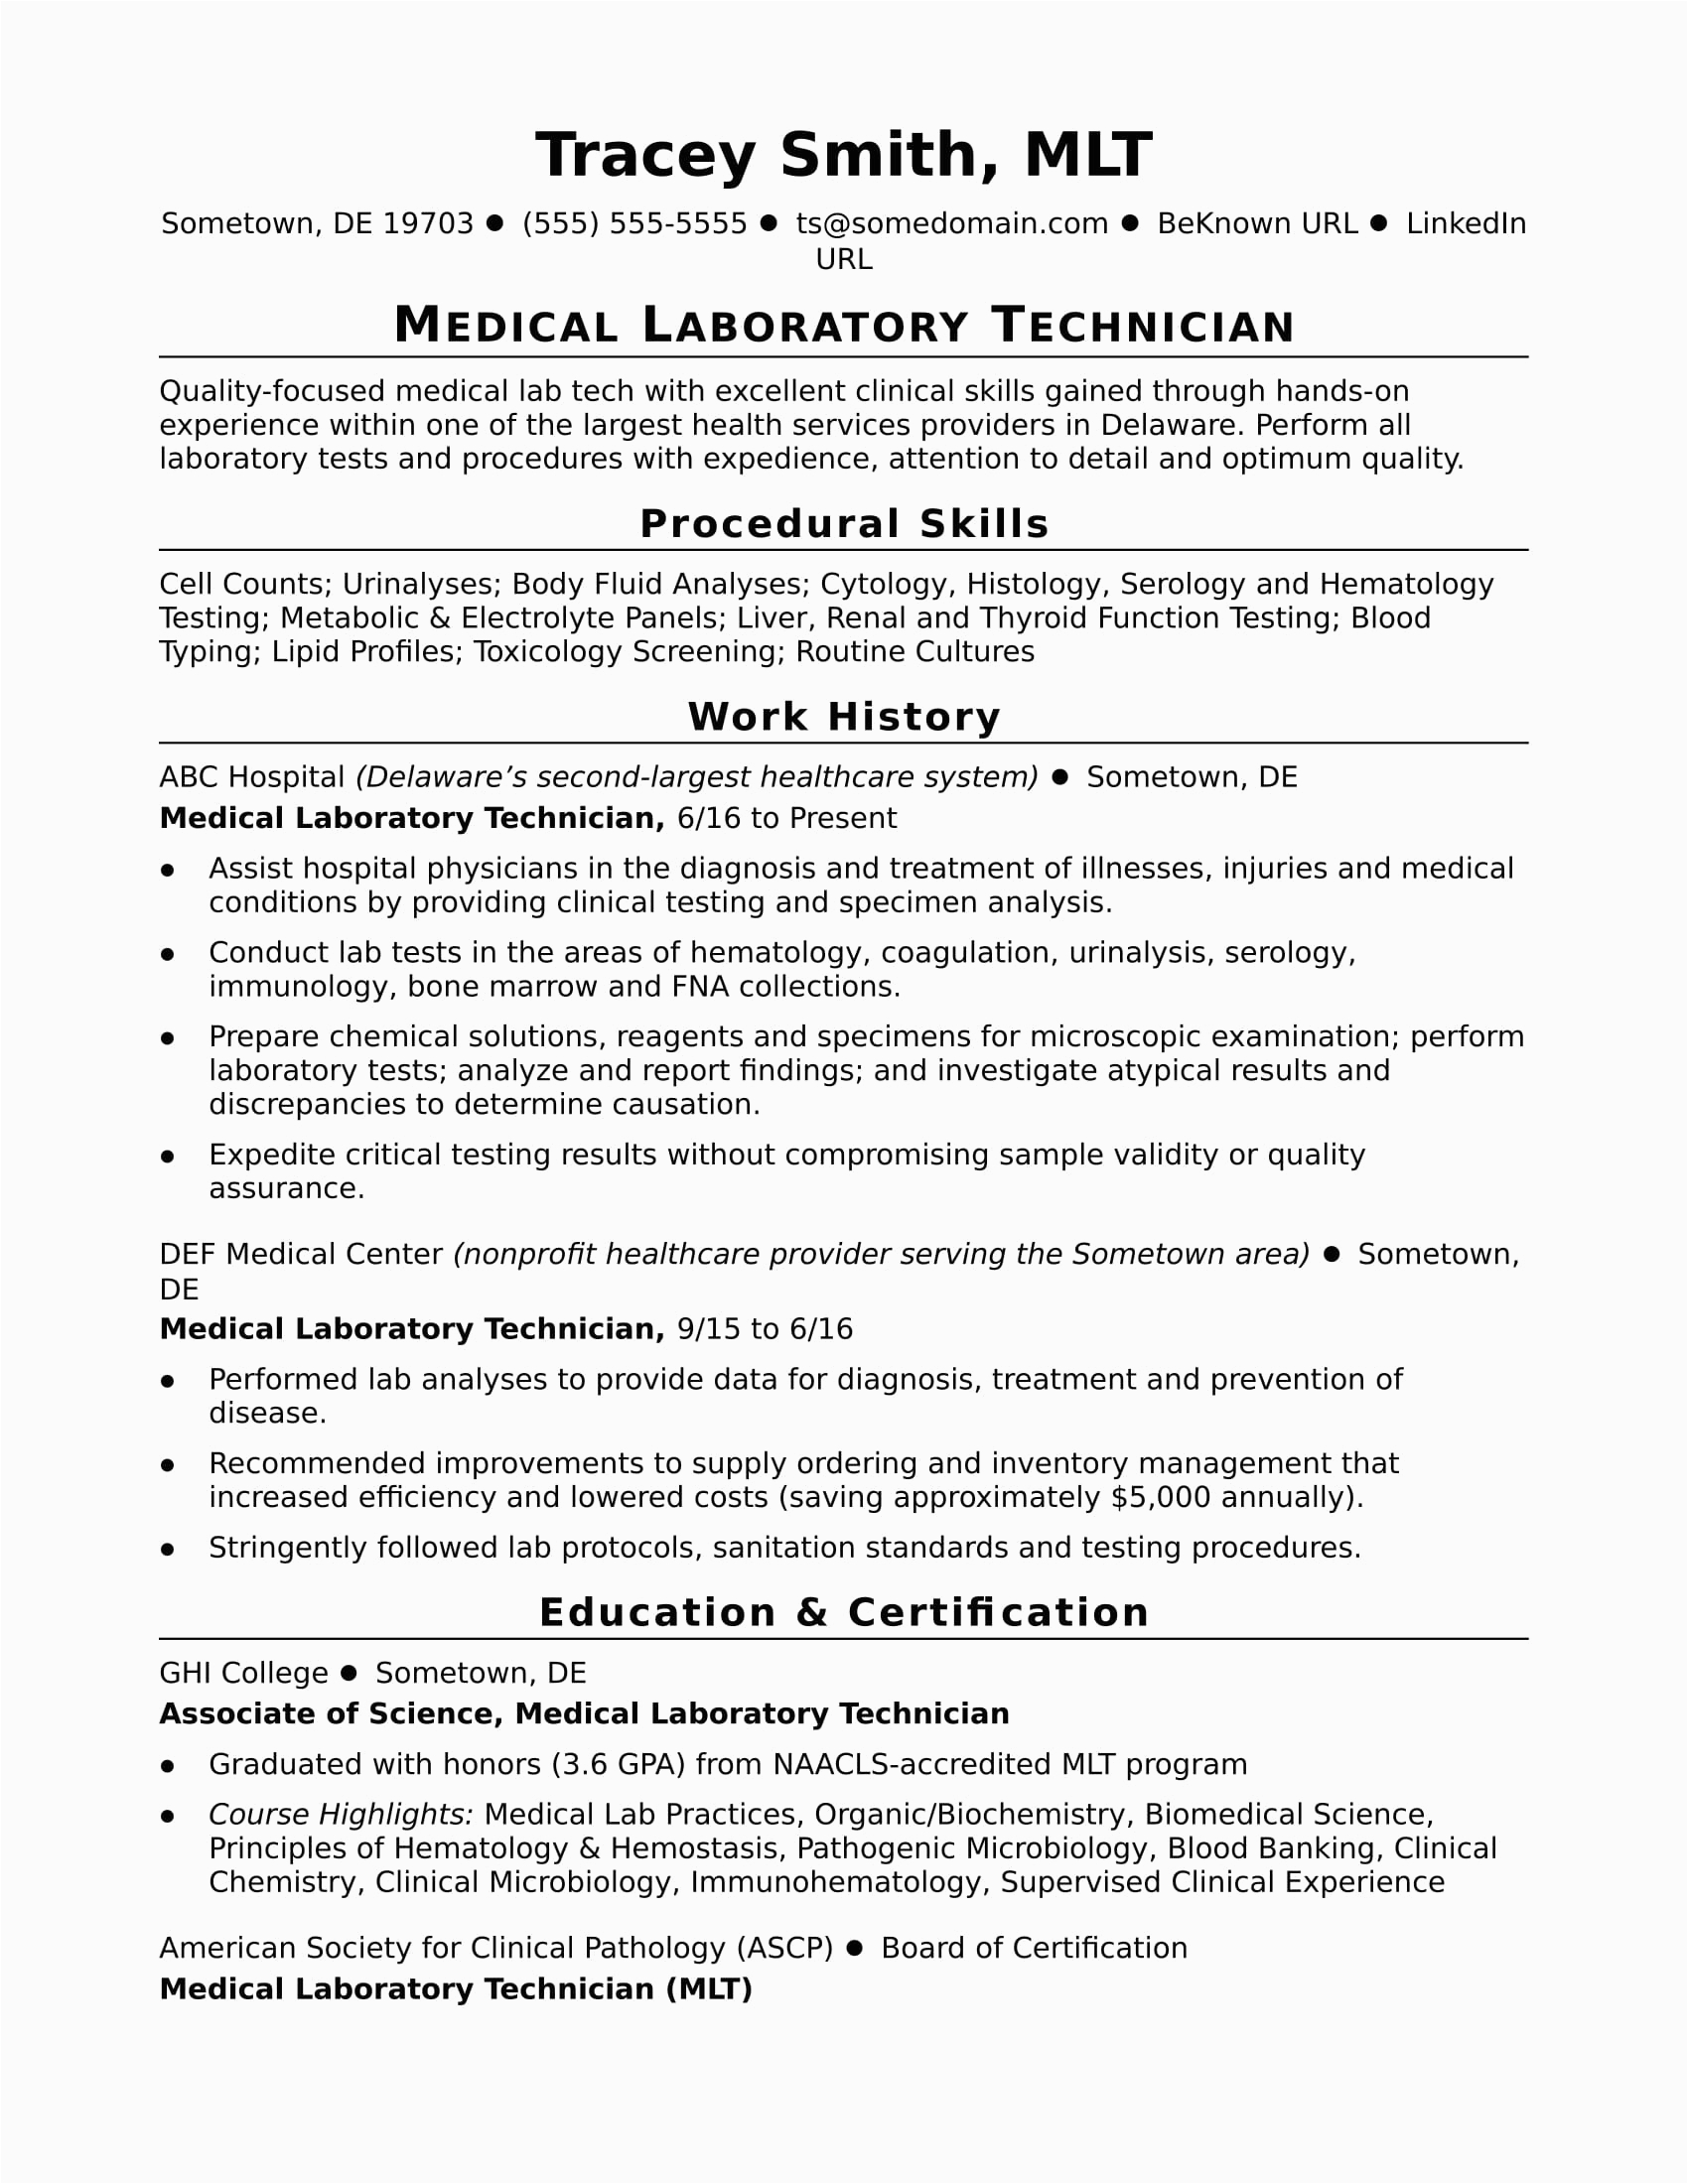 Fresh Graduate Of Medtech Resume Sample Resume for Fresh Graduate Medical Technologist without Experience